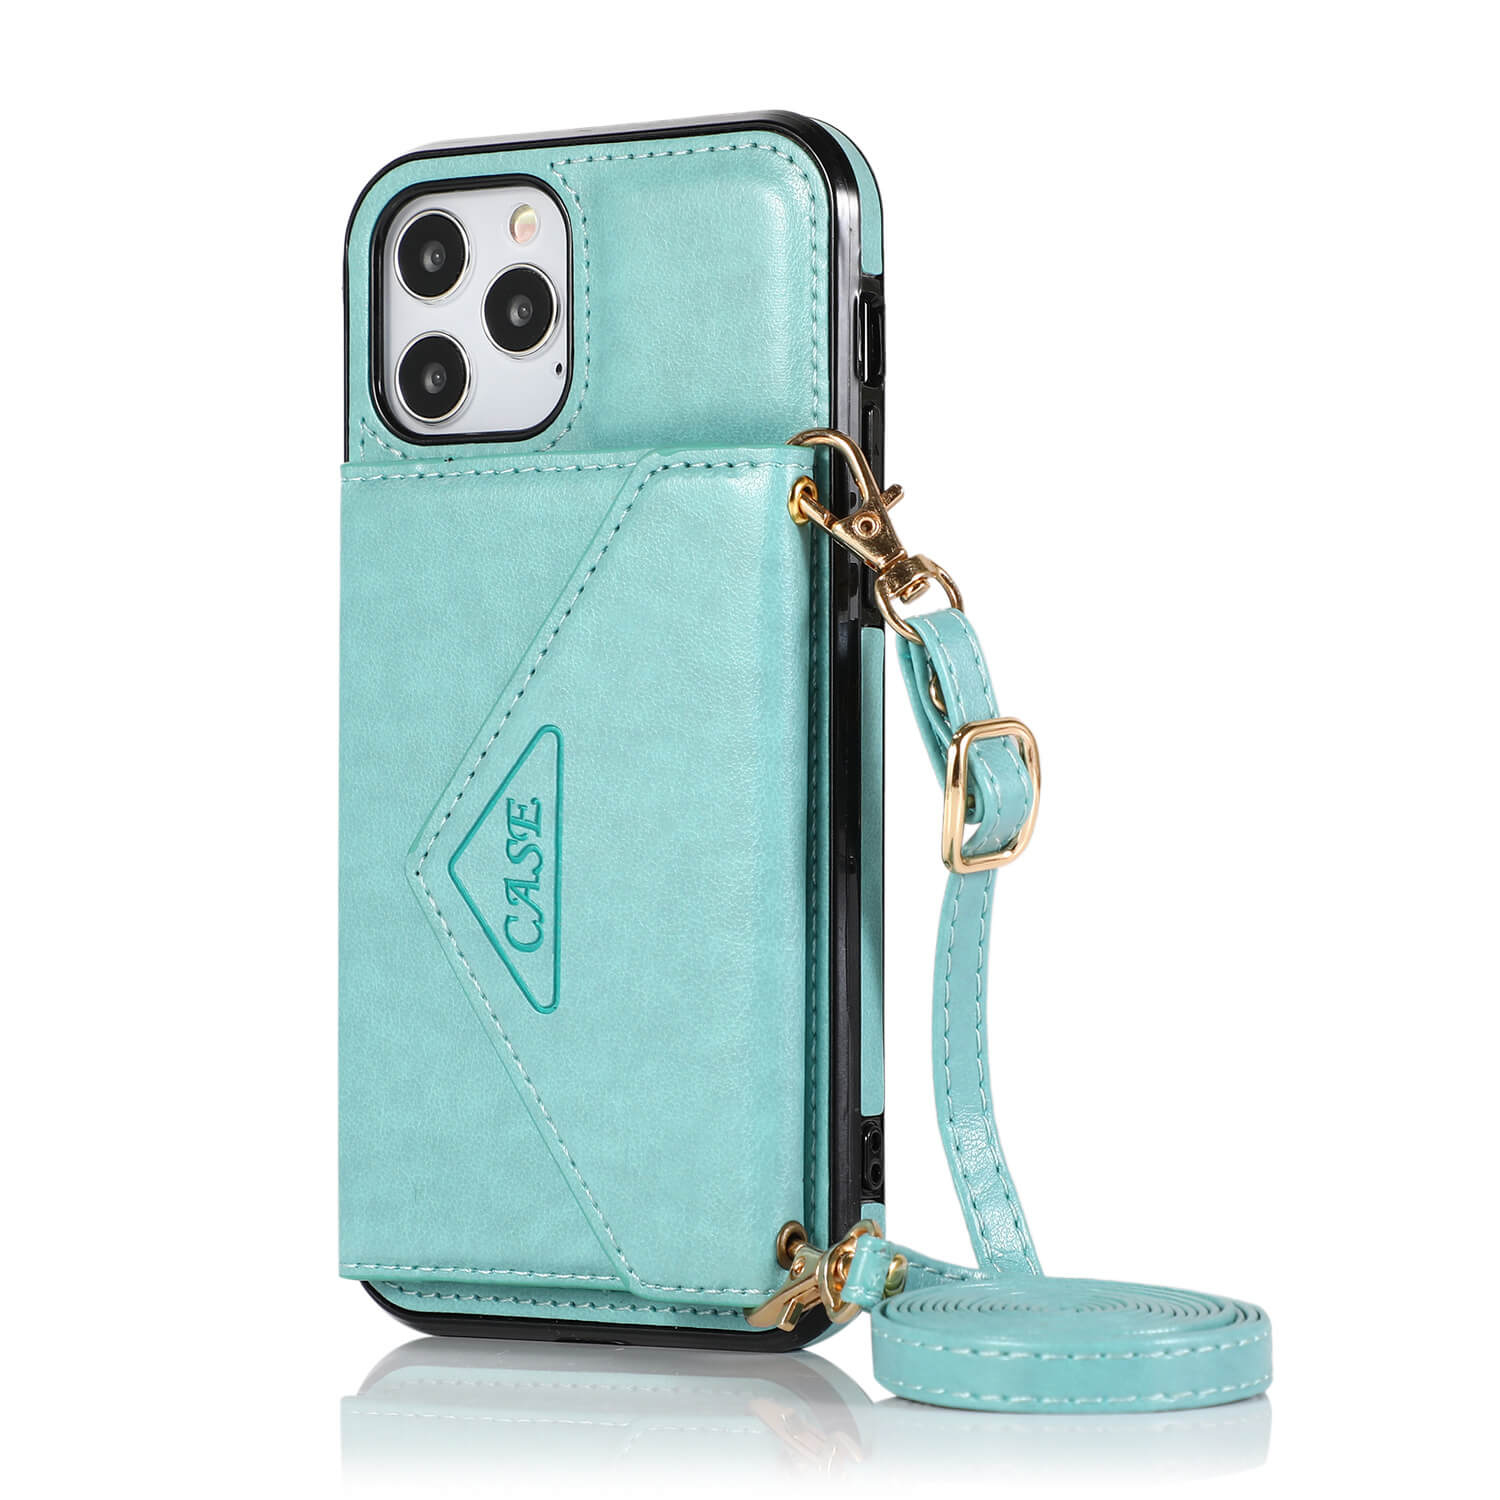 Multi-functional Crossbody Phone Case Wallet Cell Phone Wallet Purse for iPhone